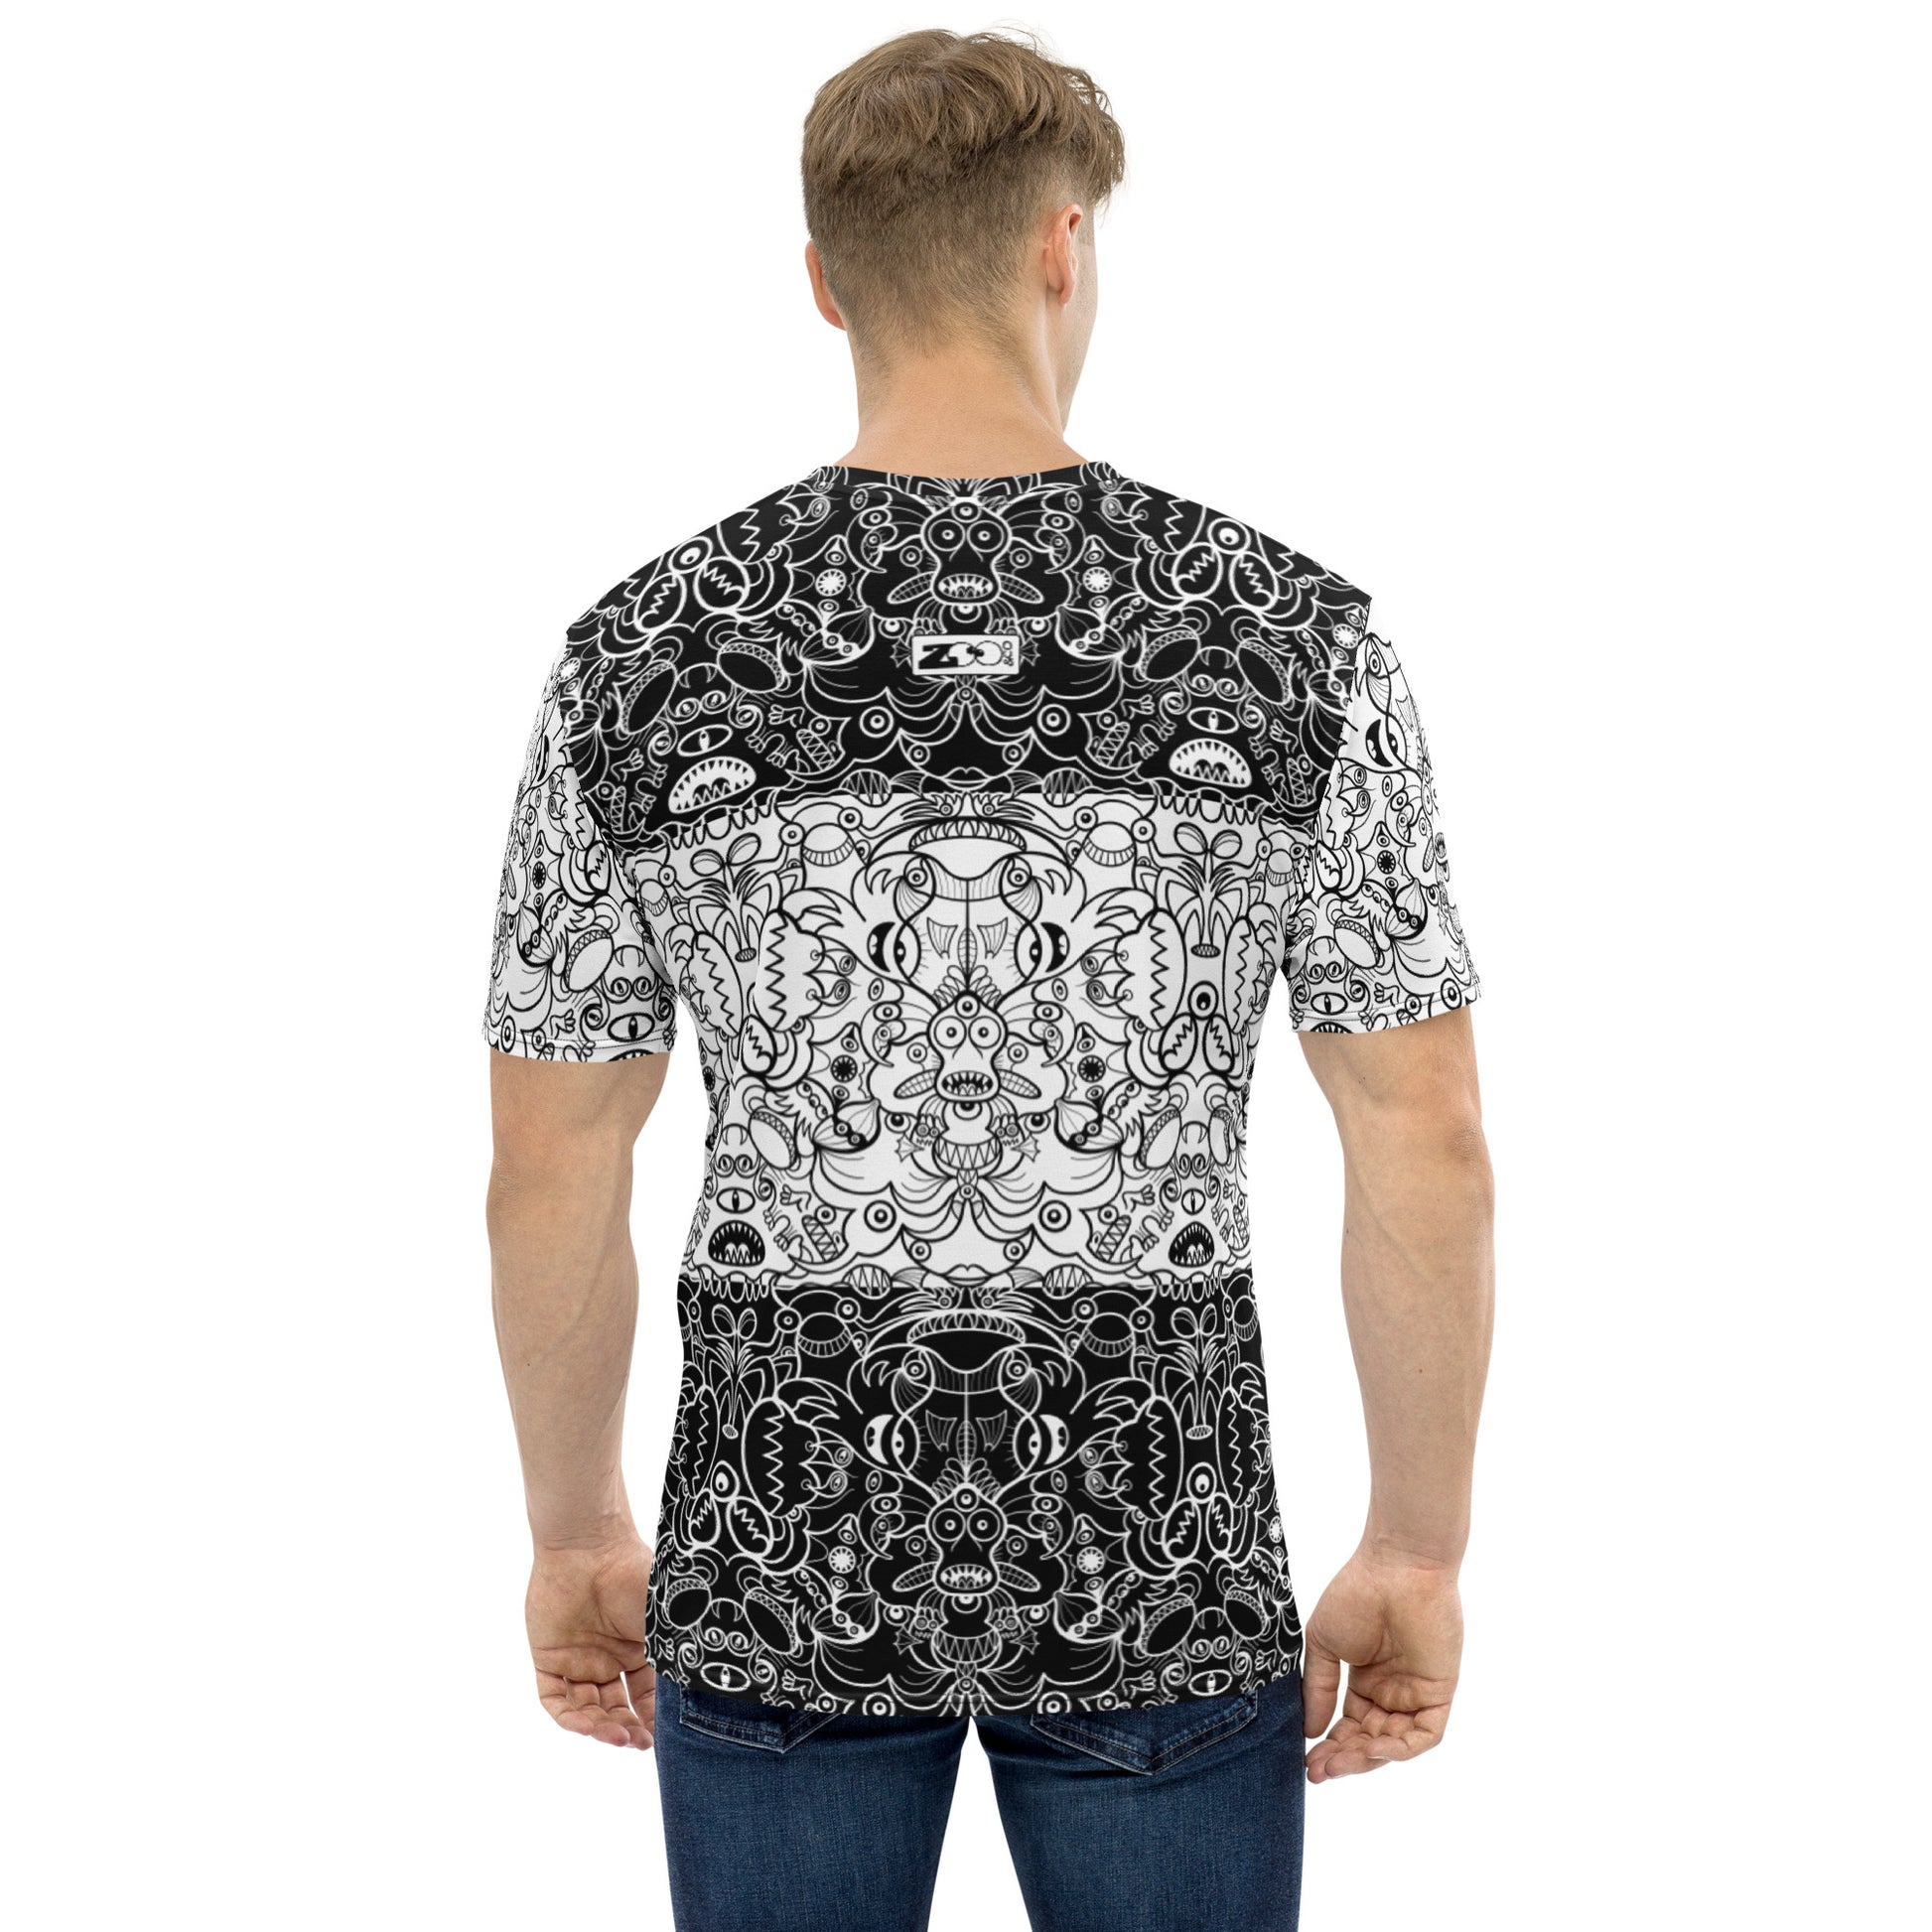 Black and white powerful Doodle world and vice versa Men's all over print t-shirt. Back view